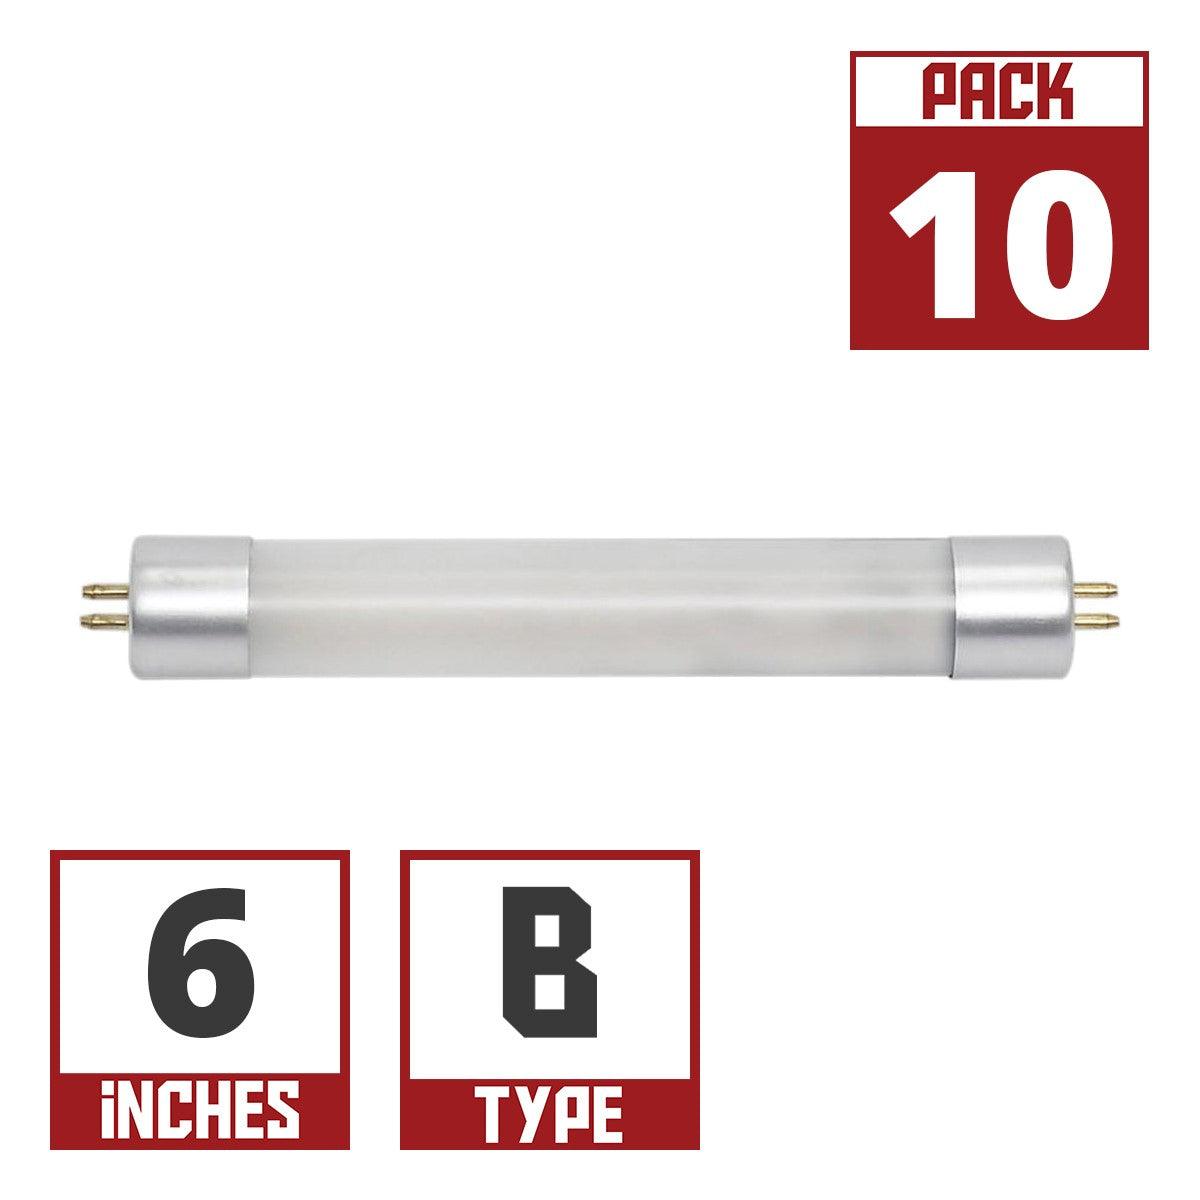 6 Inch LED mini T5 Tube, 2 Watt, 150 Lumens, 6500K, F4T5 Replacement, Ballast Bypass Double End, G5 Base (Case Of 10) - Bees Lighting